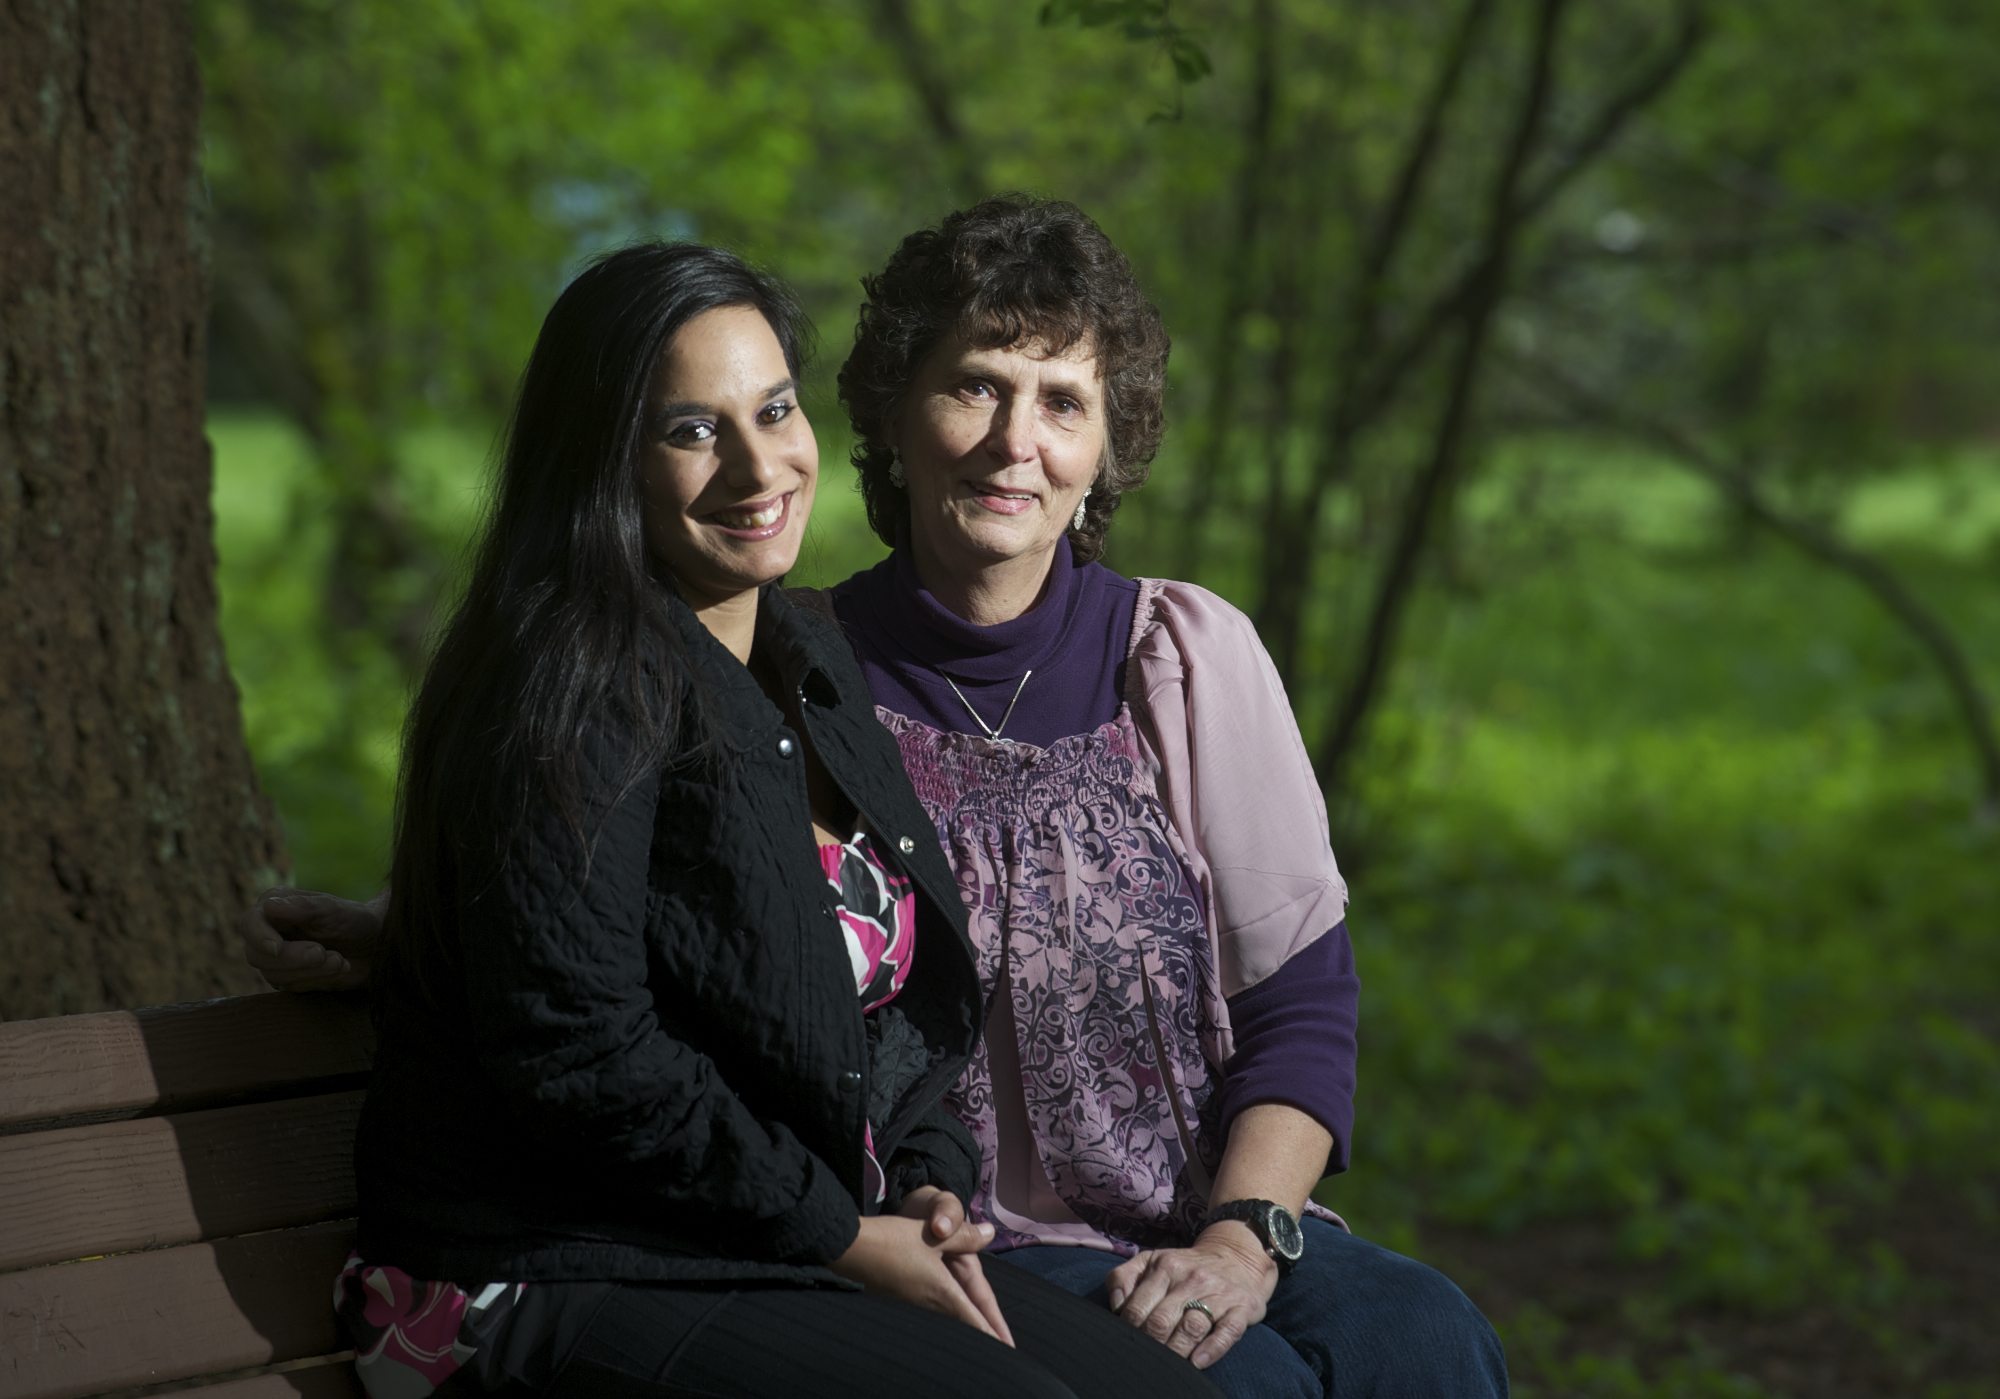 Carol Springer and her daughter Tiffany, 27, pose for a portrait at Orchards Park on Friday. Springer is being honored for years of service as a foster parent.